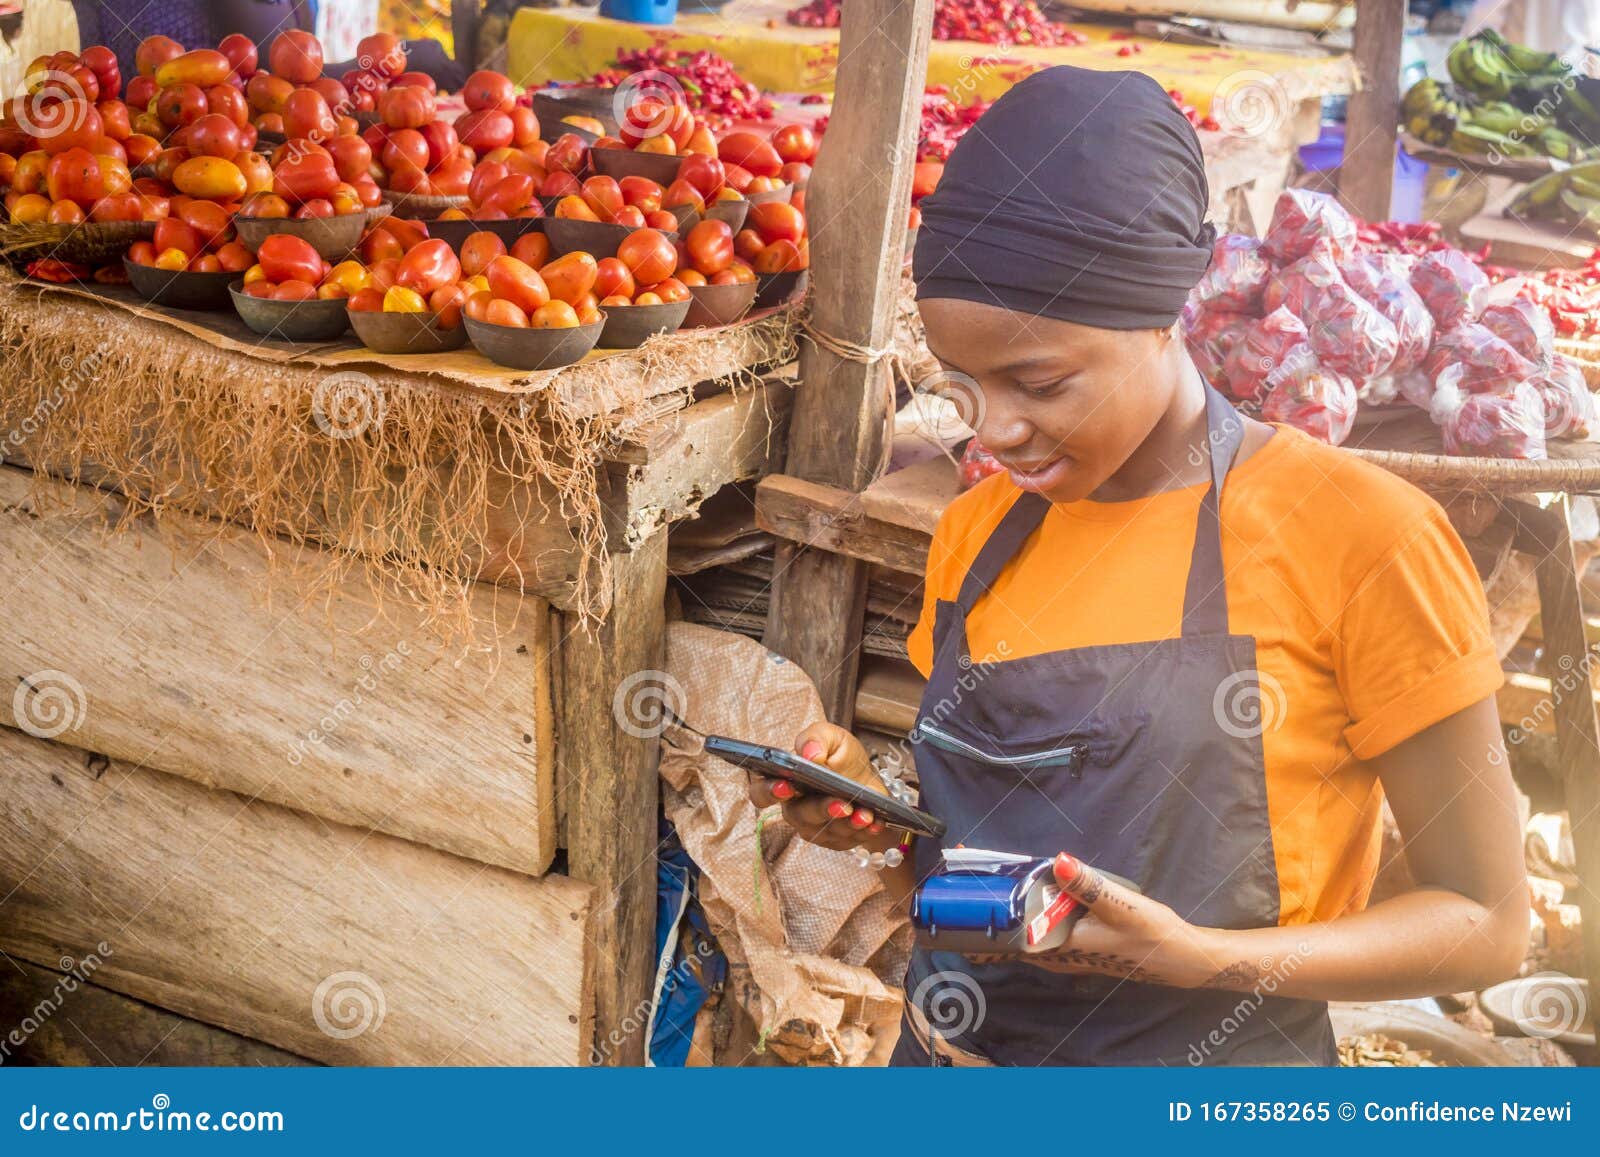 young african woman selling tomatoes in a local african market using her mobile phone and holding a mobile pos device.